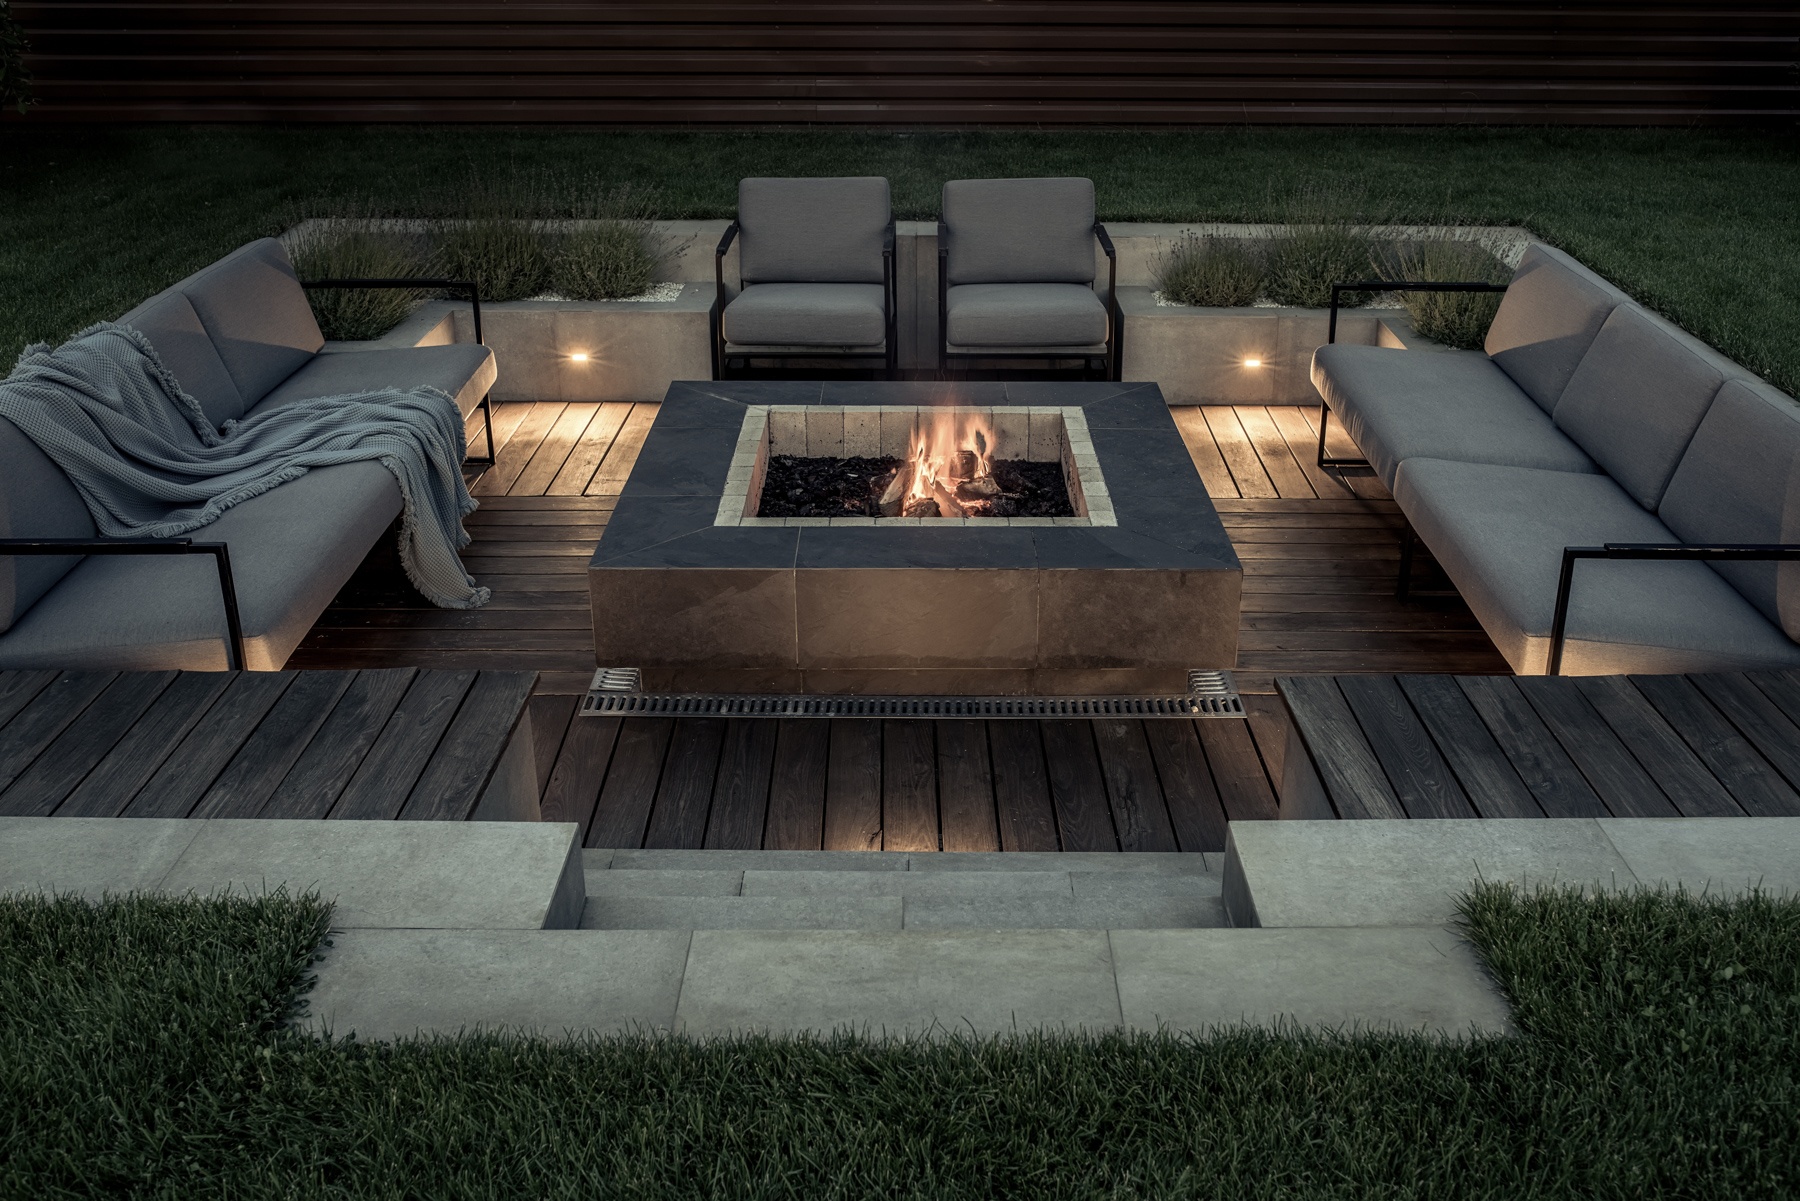 Fire pits or outdoor fireplaces